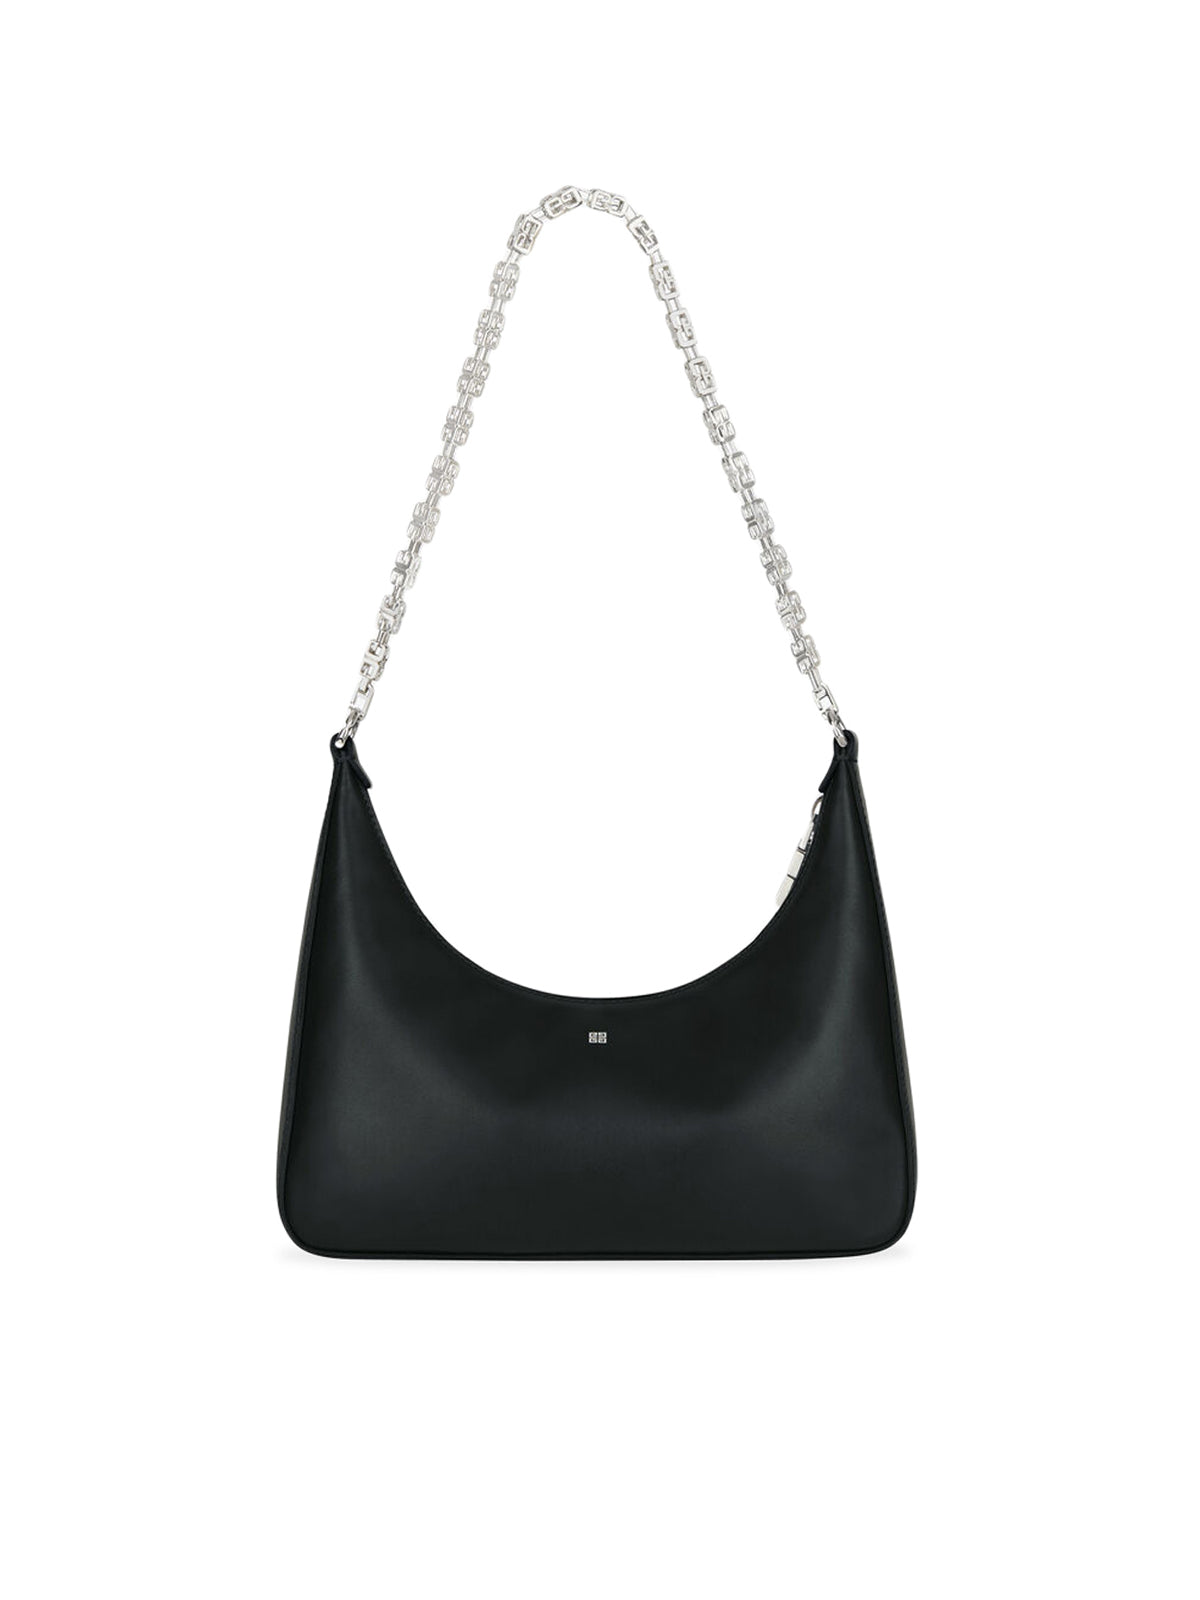 SMALL MOON CUT OUT BAG IN LEATHER